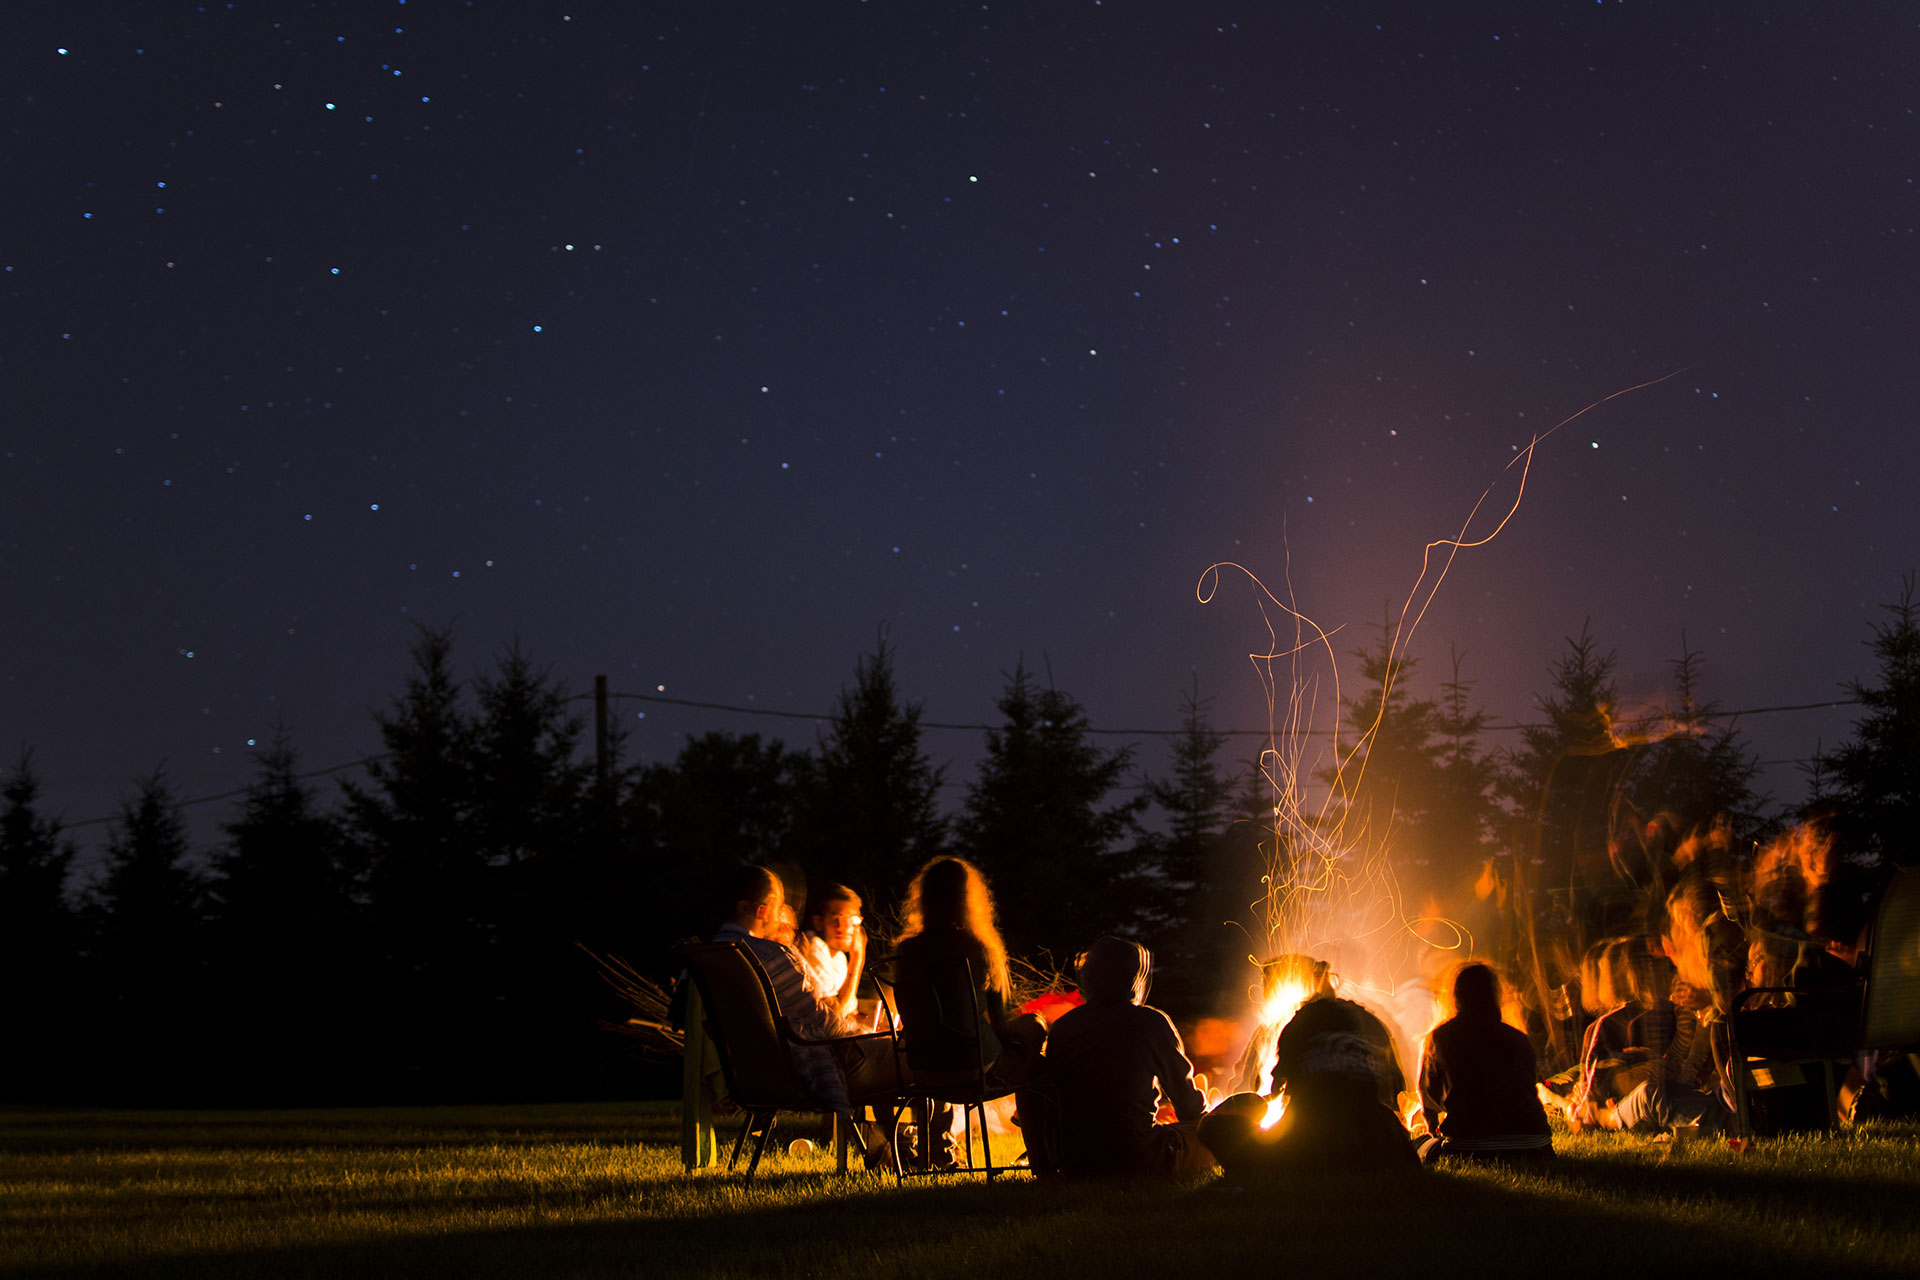 Camping at Night; Courtesy of fboudrias/Shutterstock.com